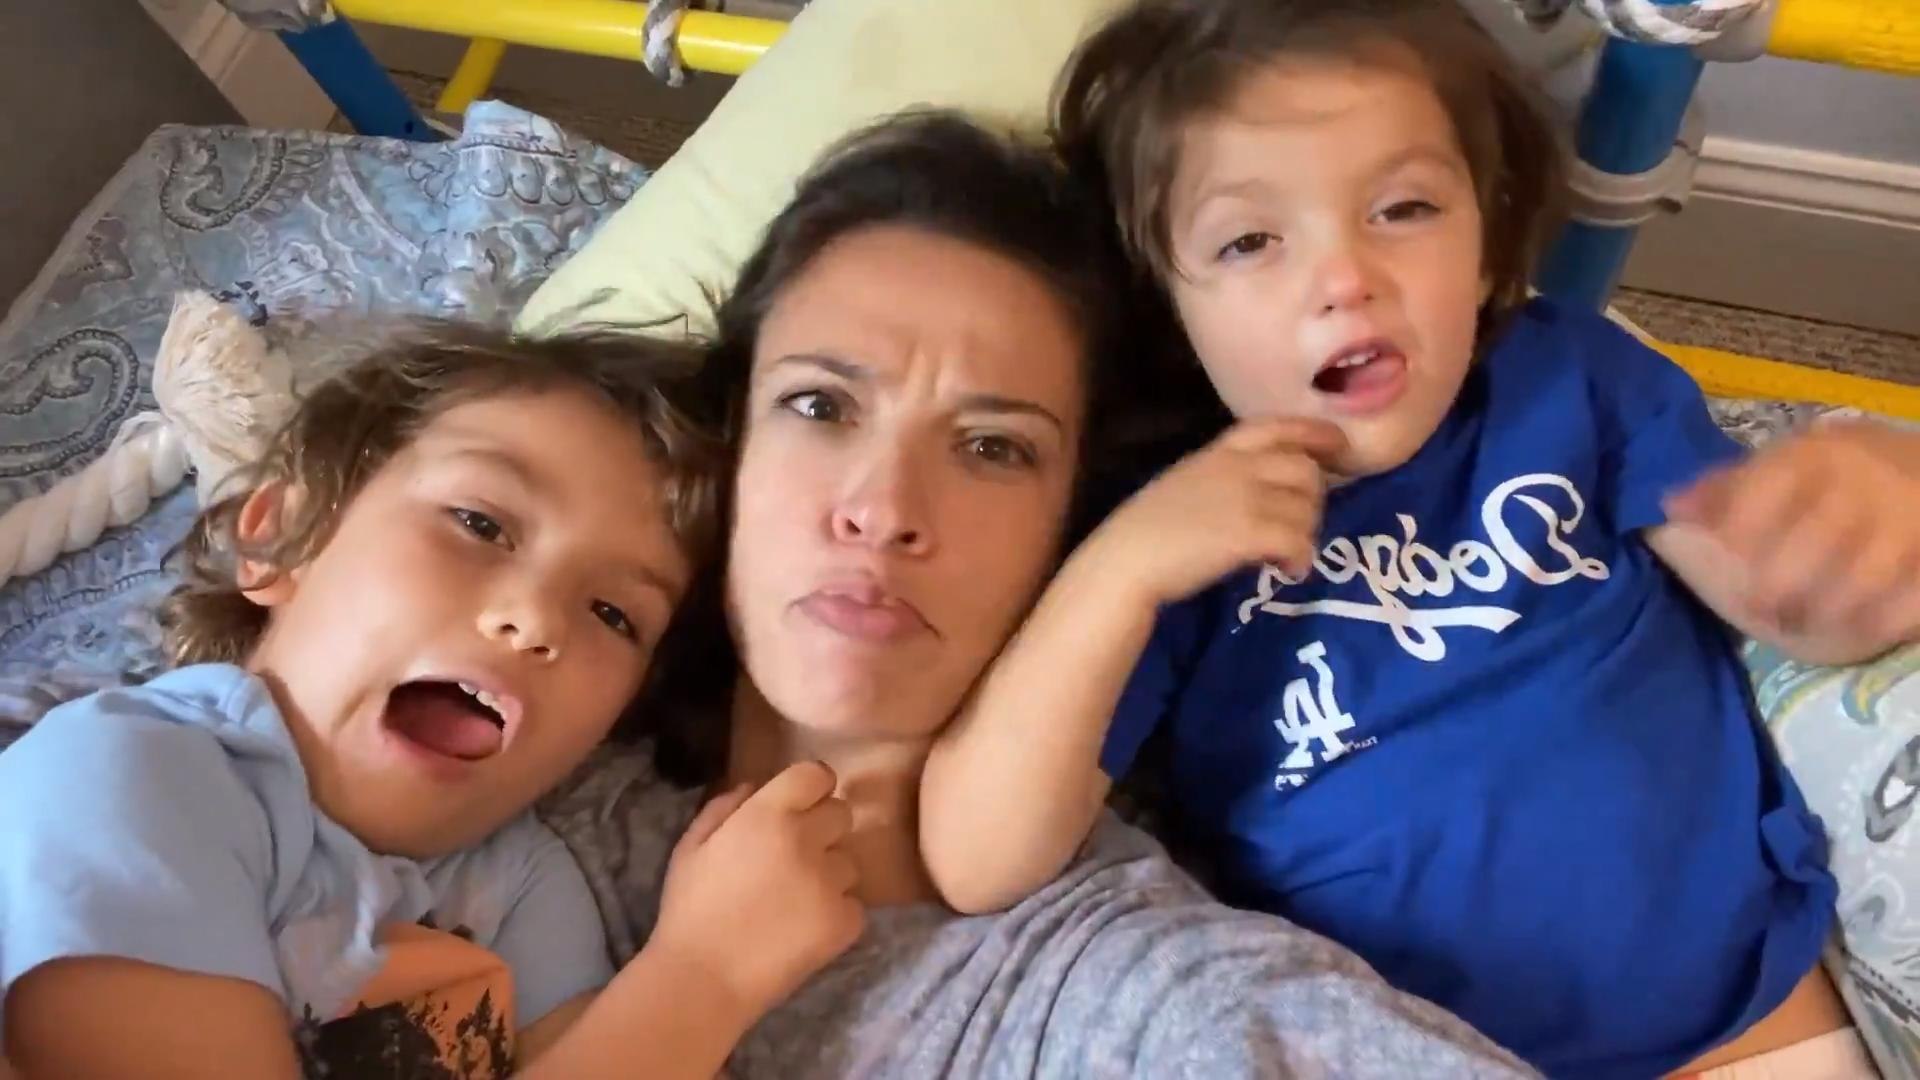 Mom And Kids Make Funny Faces At Camera - video Dailymotion